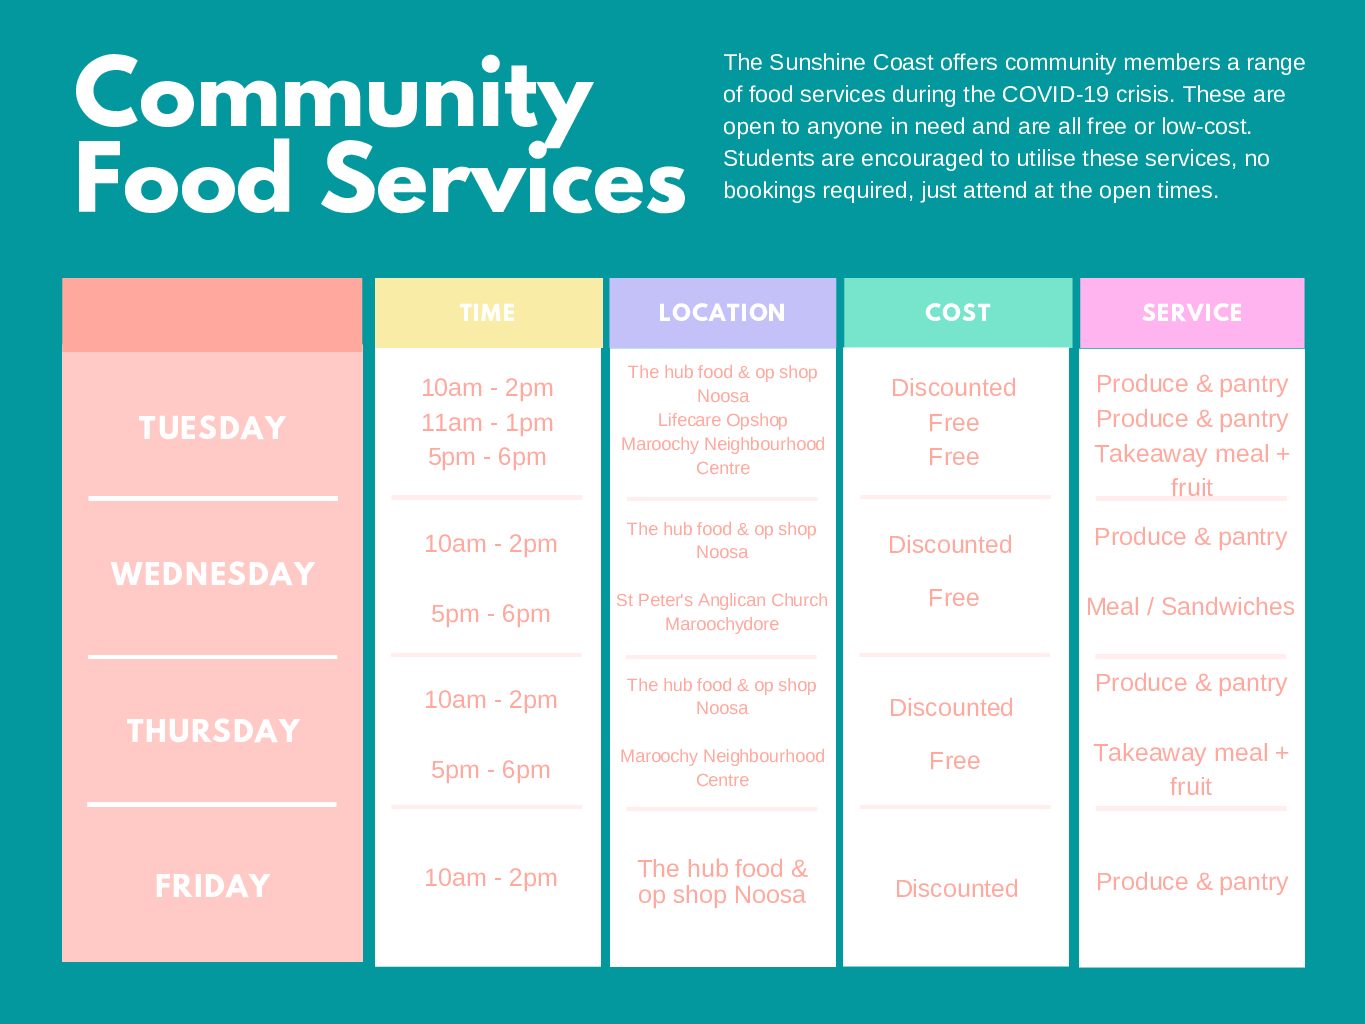 Community Food Services